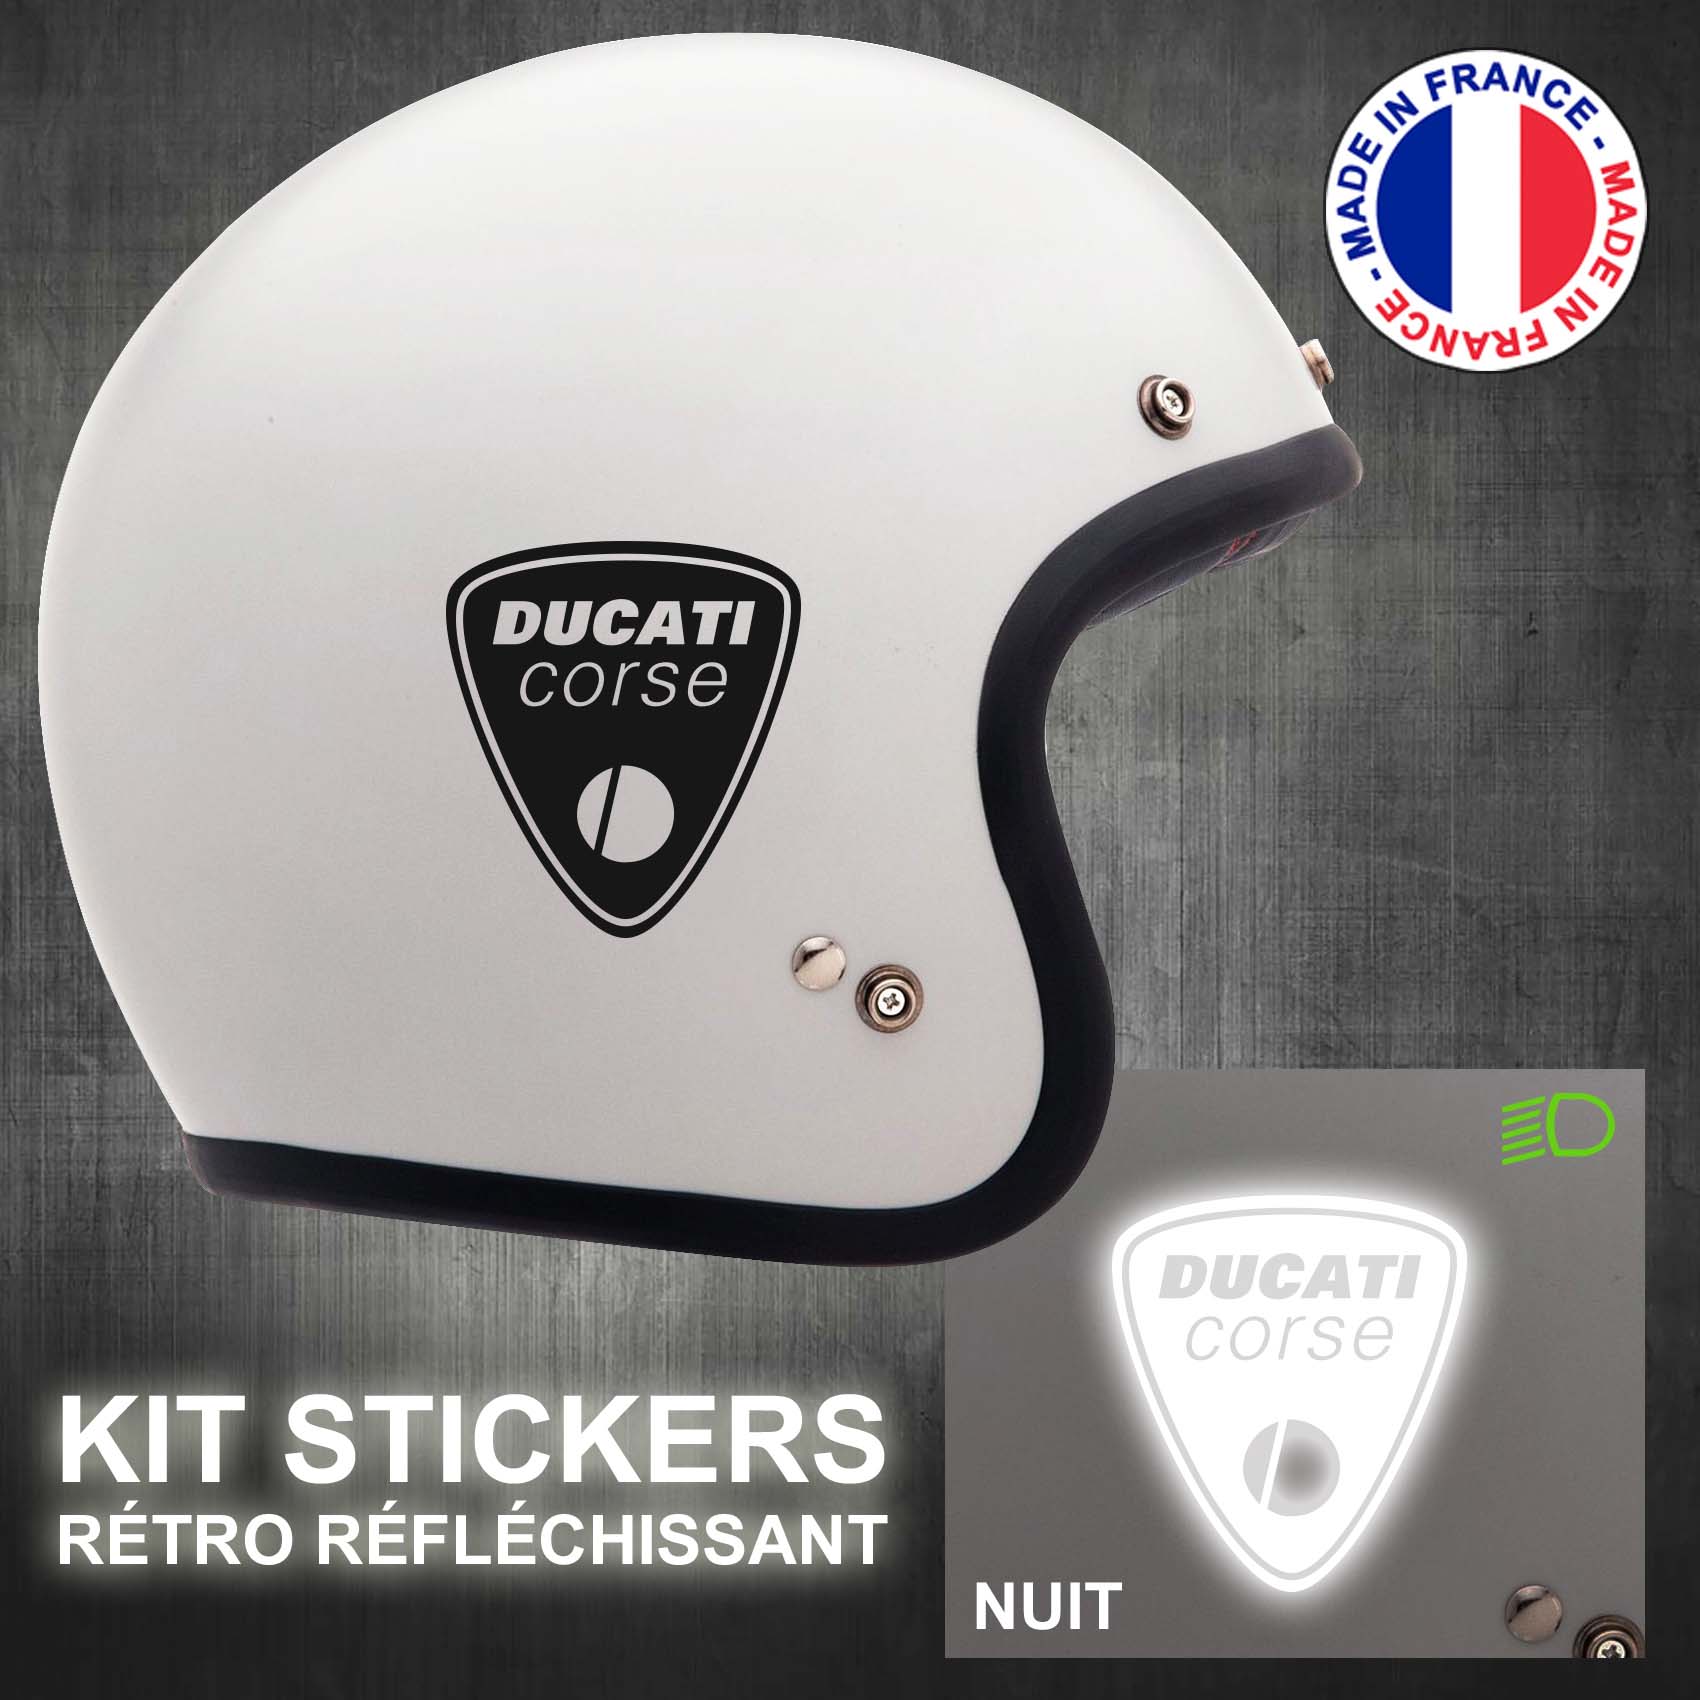 stickers-casque-moto-ducati-corse-ref1-retro-reflechissant-autocollant-moto-velo-tuning-racing-route-sticker-casques-adhesif-scooter-nuit-securite-decals-personnalise-personnalisable-min